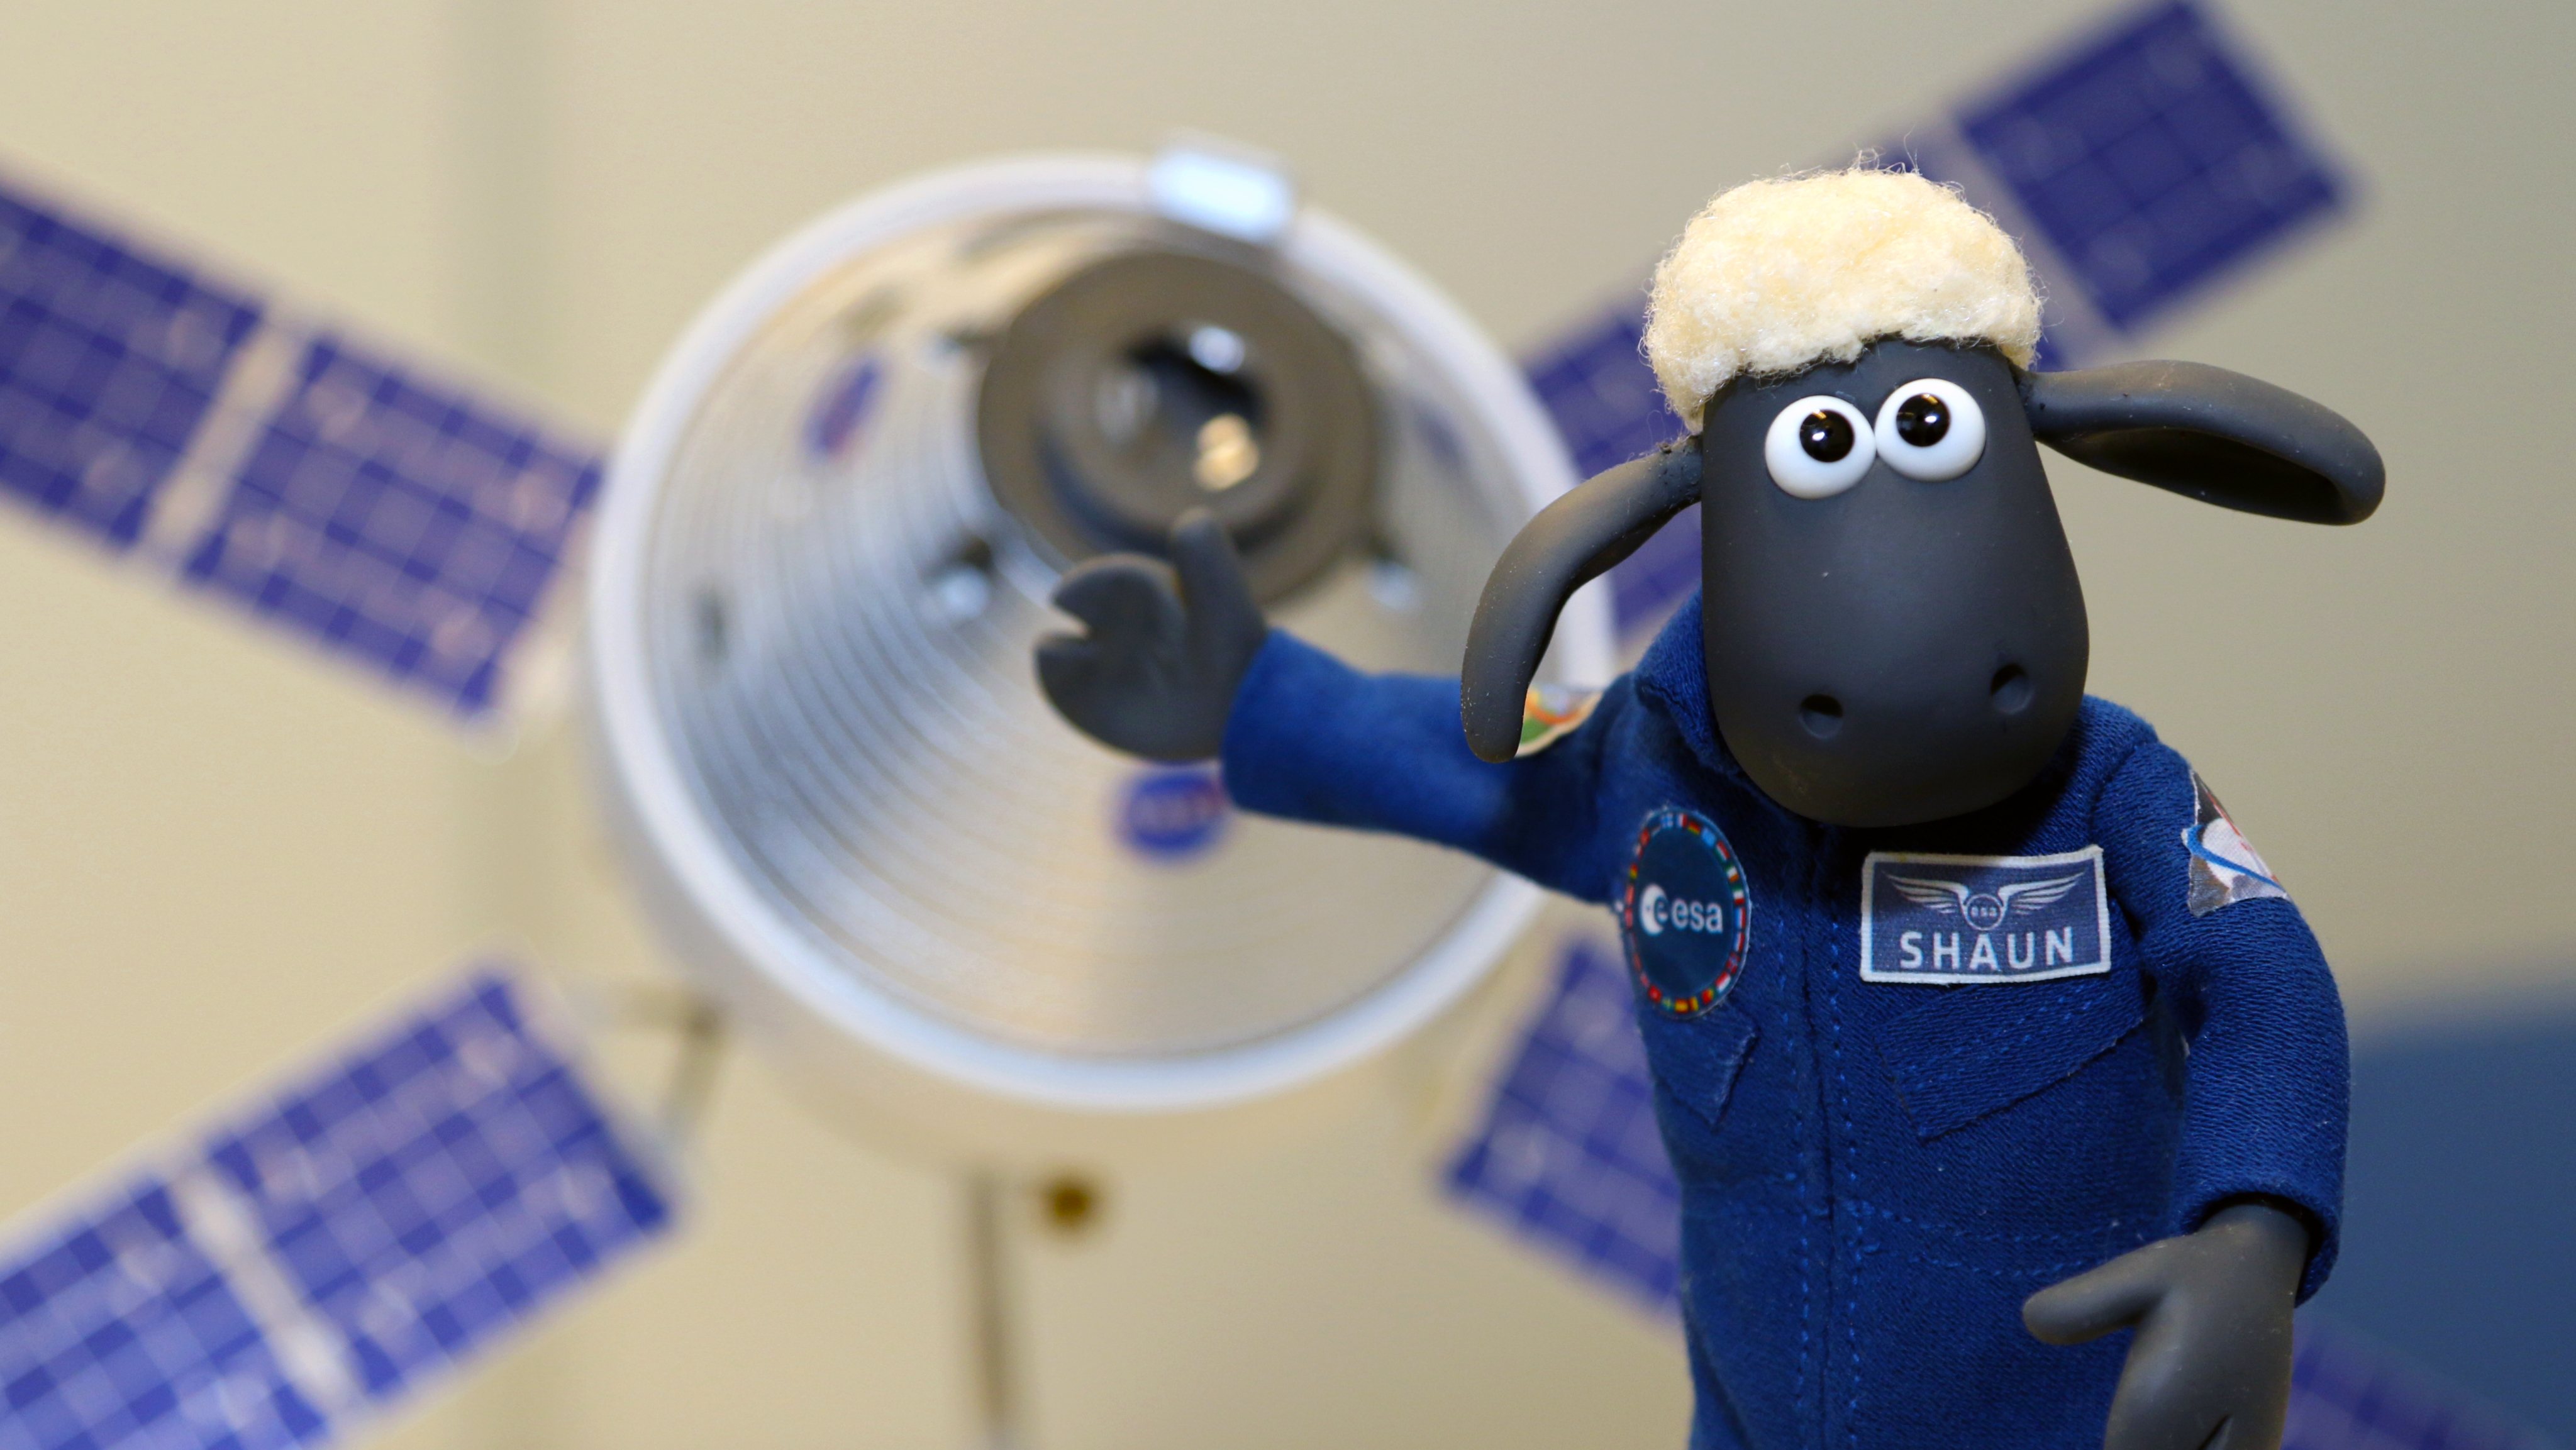 Shaun_the_Sheep_with_Orion_and_European_Service_Module